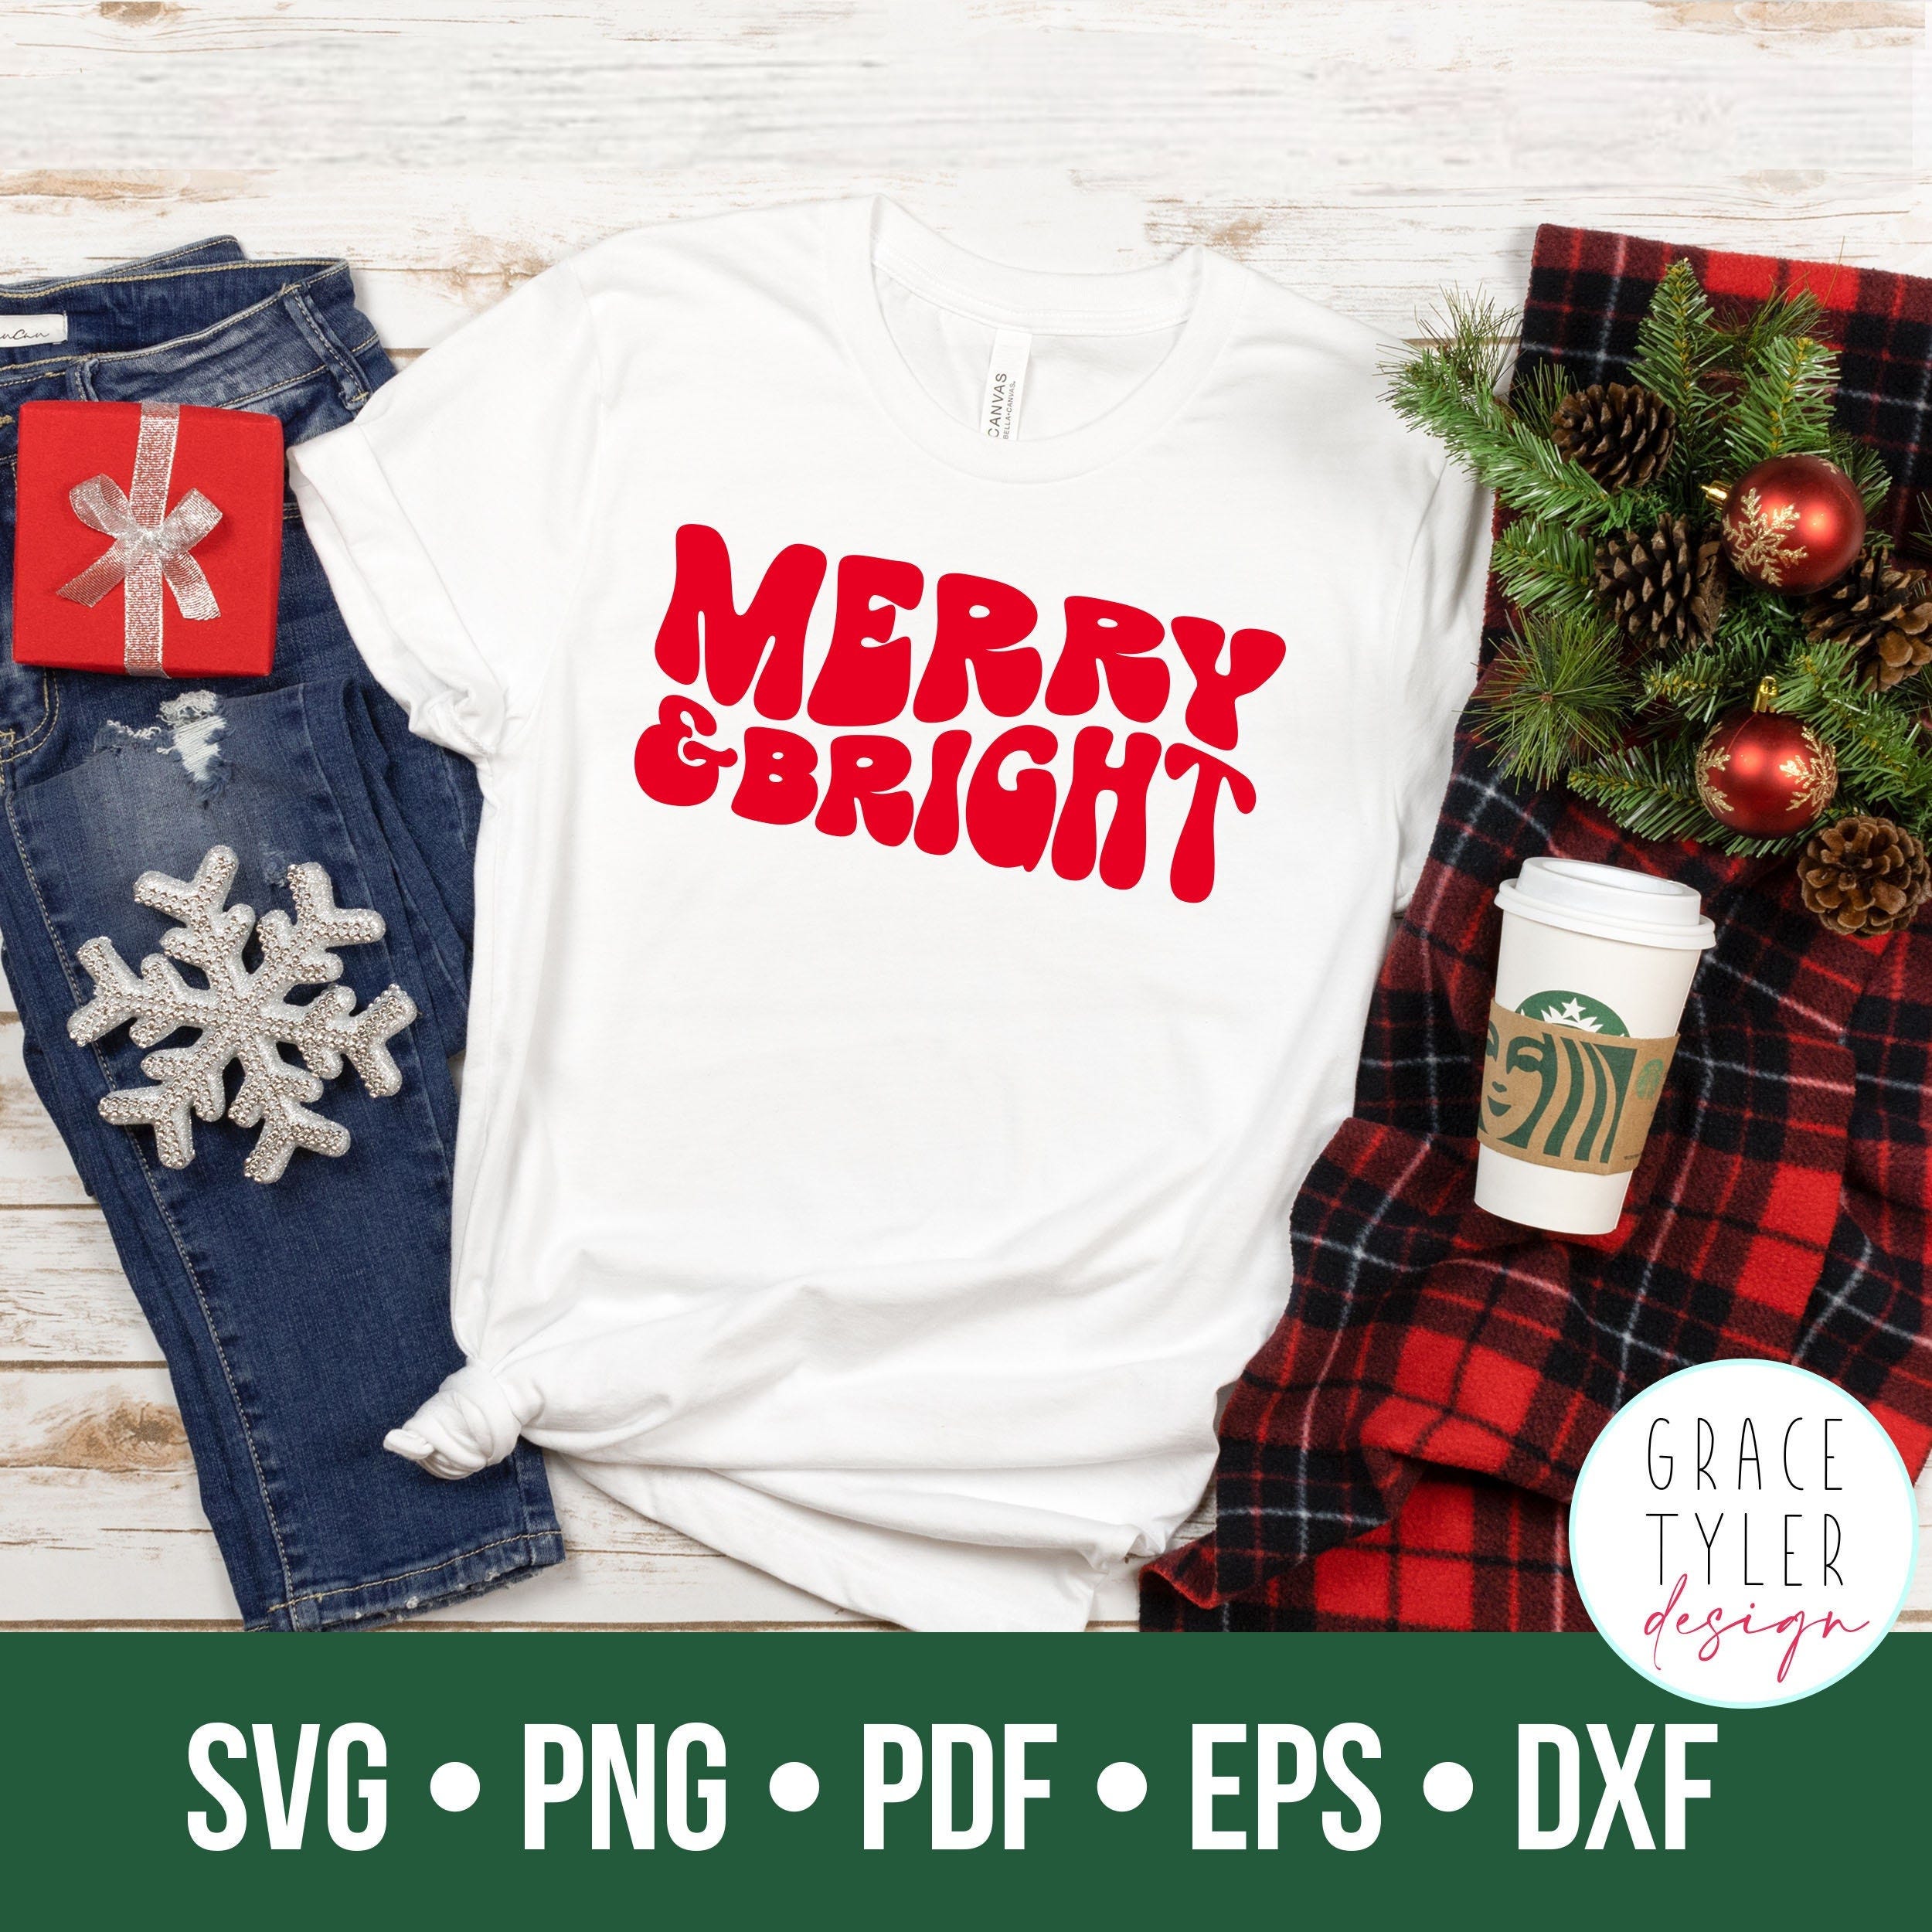 Merry & Bright SVG, Merry Christmas Svg, Merry and Bright svg, Wavy Letters Svg, Holiday svg, Winter, Svg Dxf Eps PDF Png Silhouette Cricut